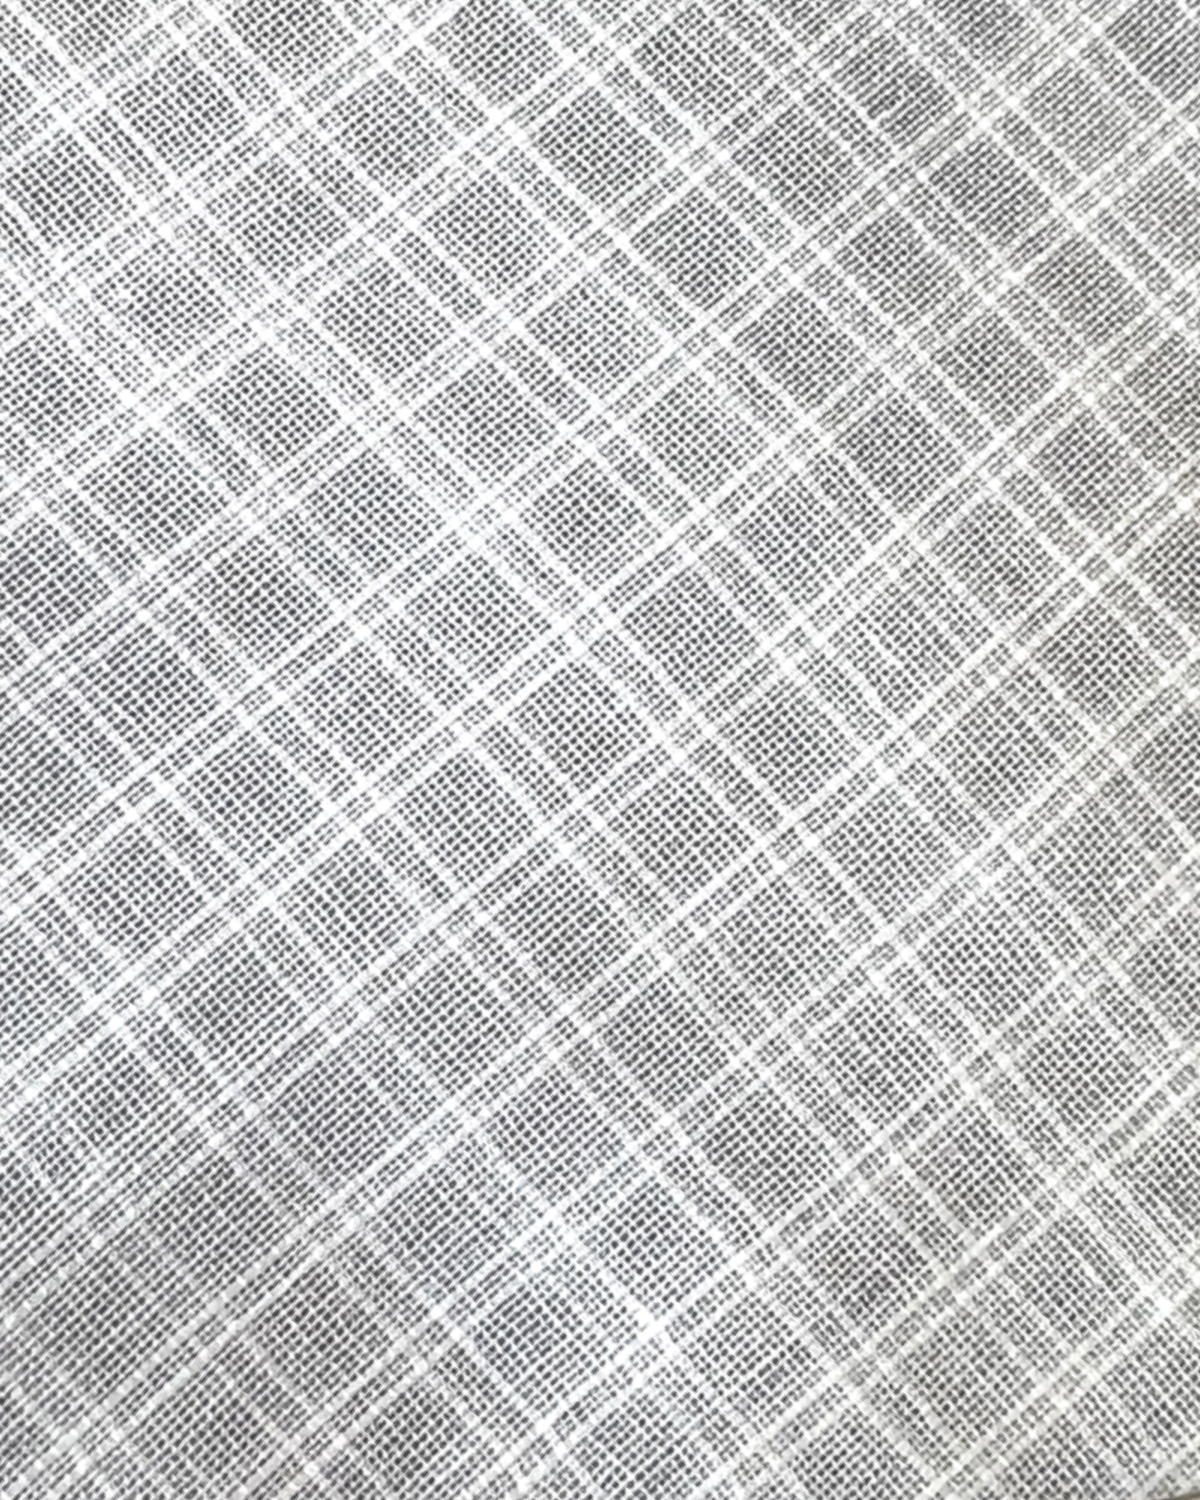 1910s-1920s Checked Sheer Cotton Dimity